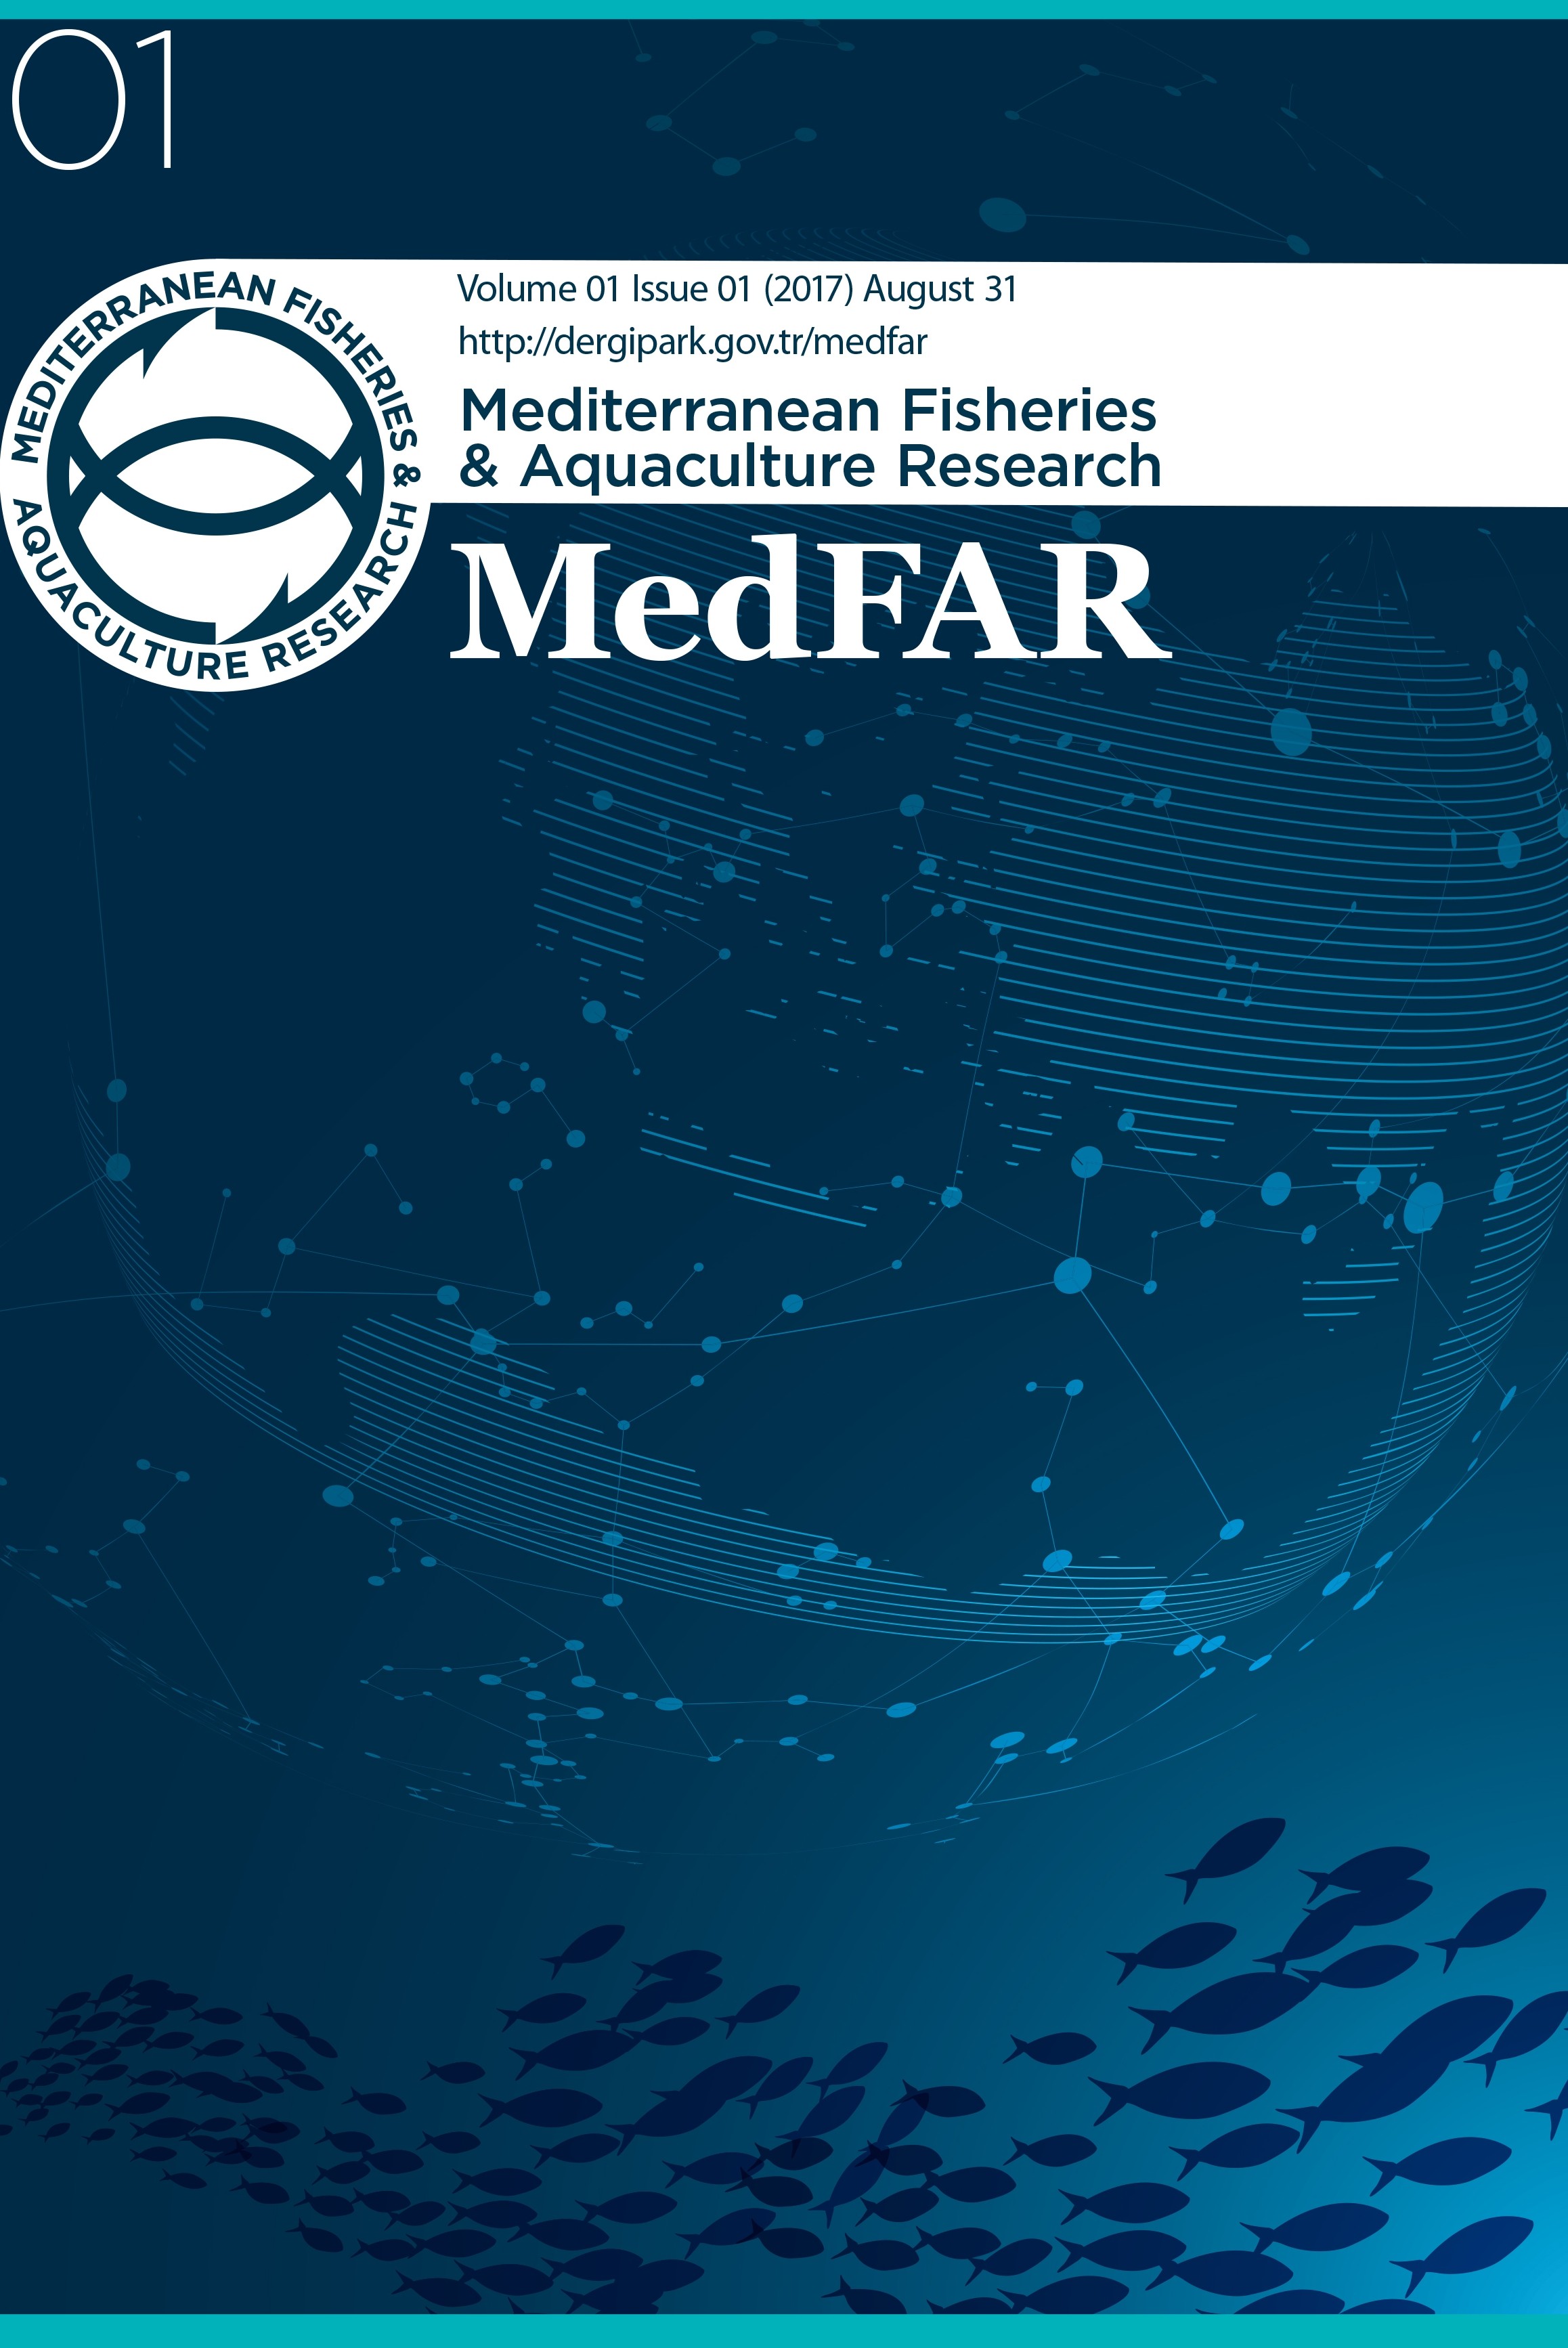 Mediterranean Fisheries and Aquaculture Research